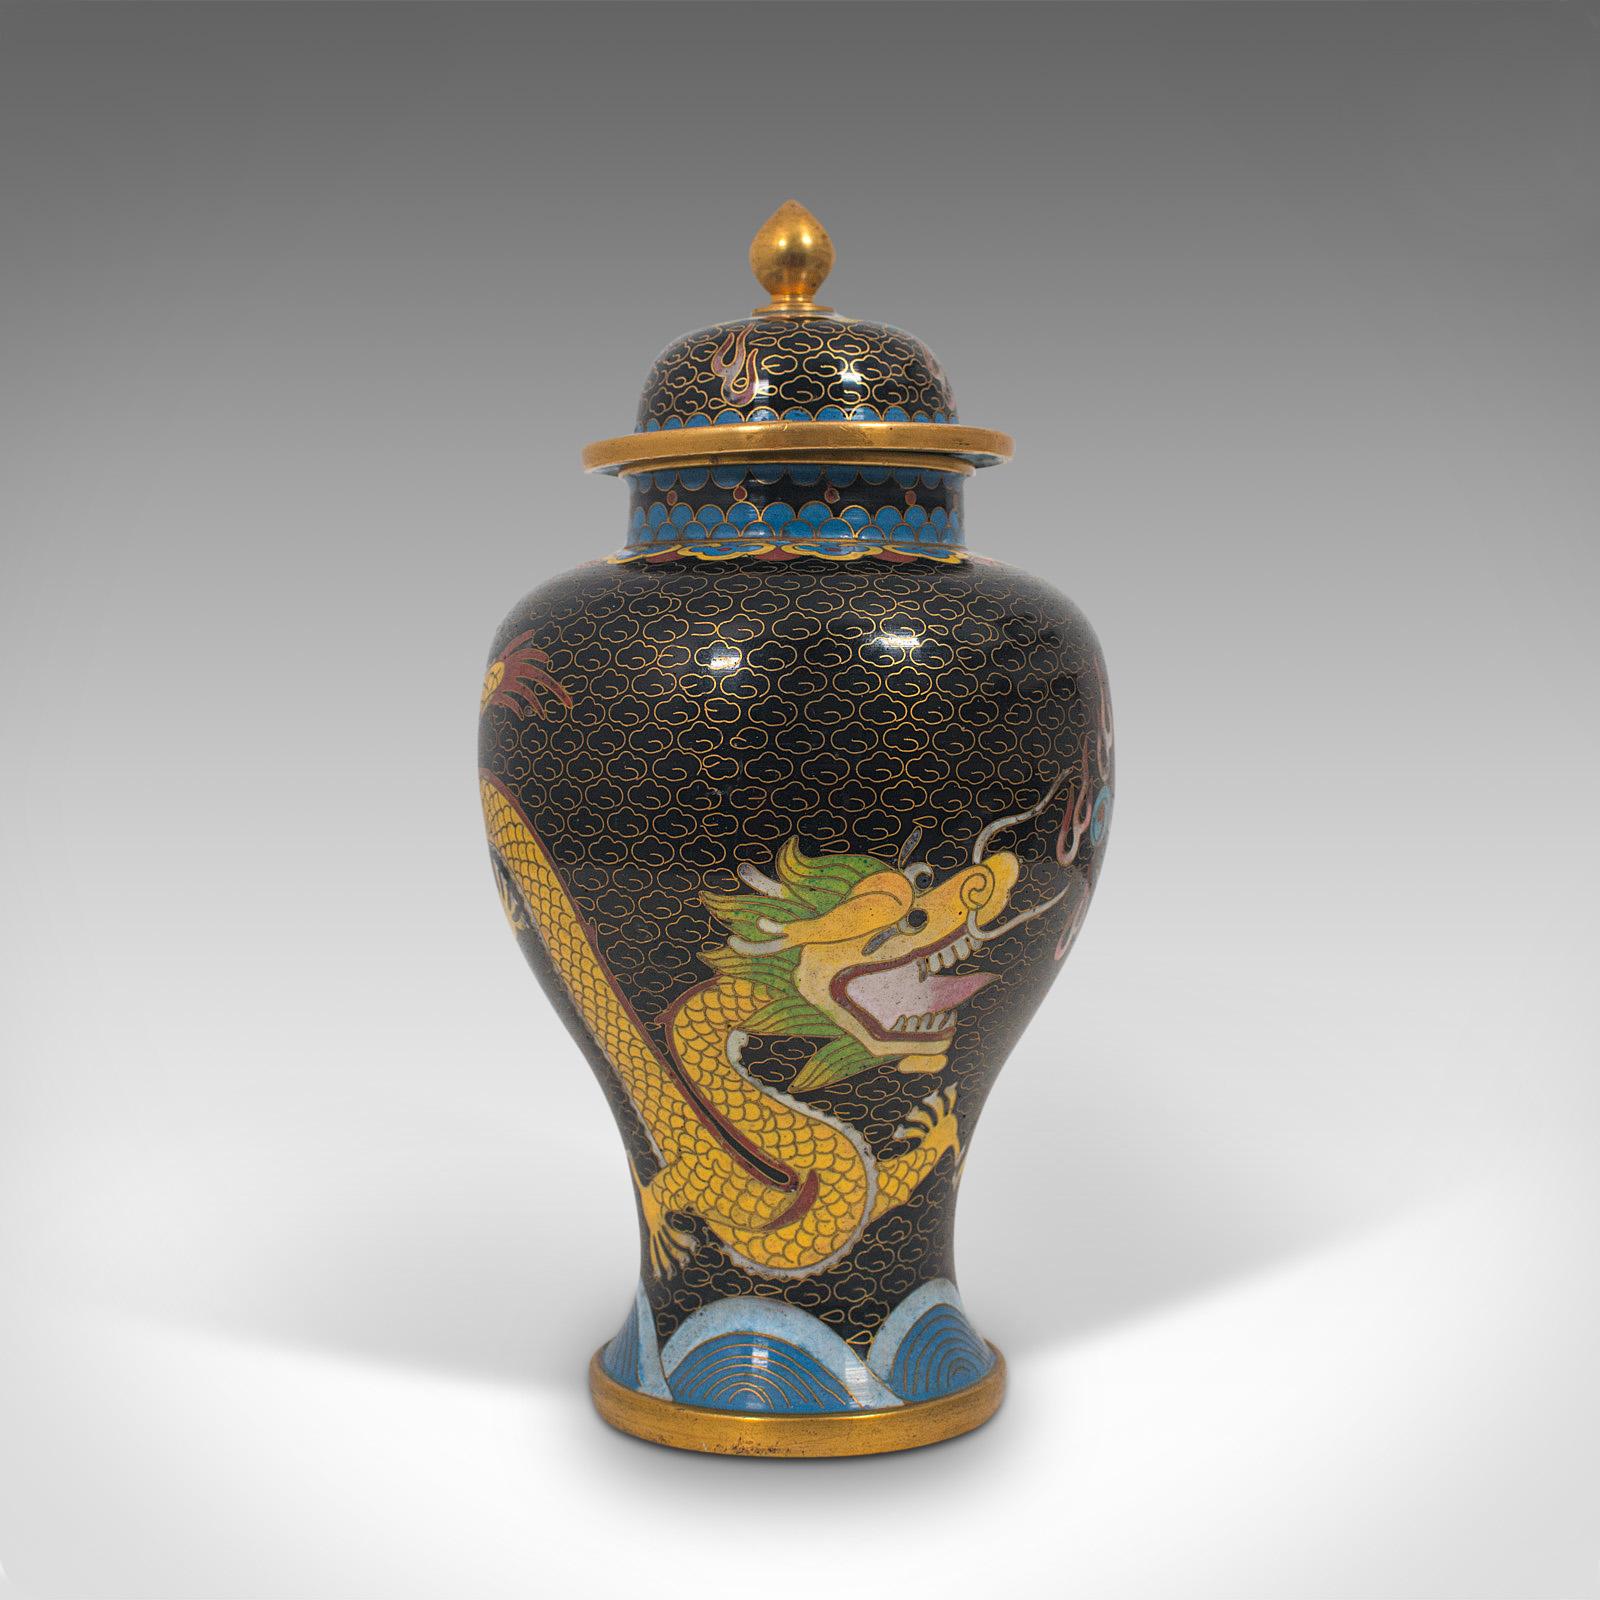 Antique Decorative Spice Jars, Chinese, Cloisonné, Baluster Urn circa 1900, Pair For Sale 2